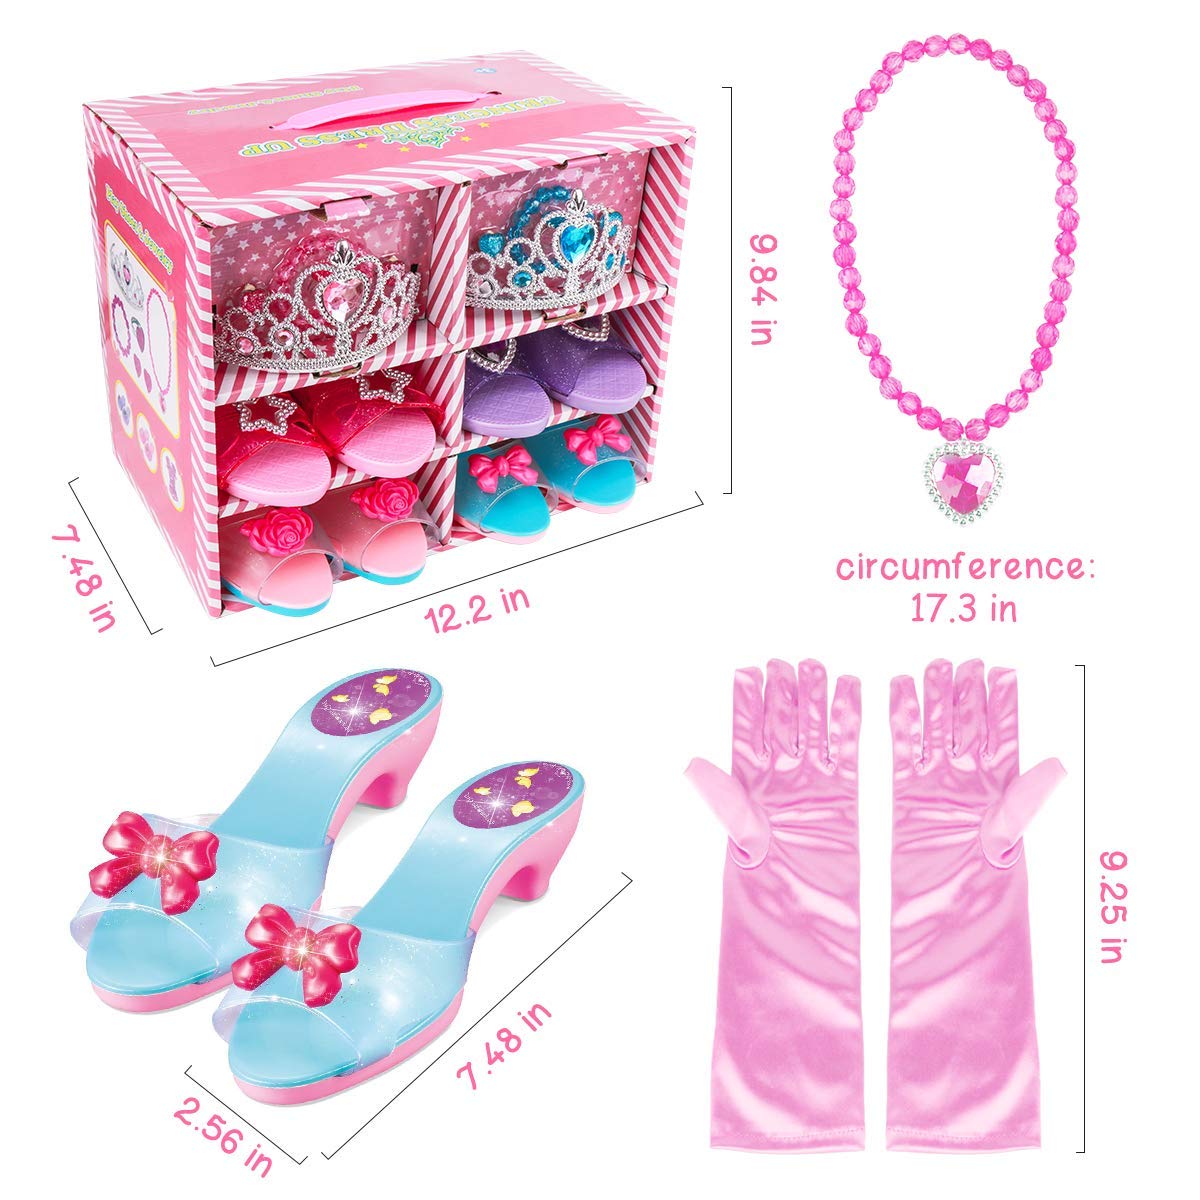 Meland Princess Dress Up Shoes and Jewelry Boutique - 4 Pairs of Play Shoes and Pretend Jewelry Toys Princess Accessories Play Gift Set for Toddlers Little Girls Aged 3,4,5,6 Years Old